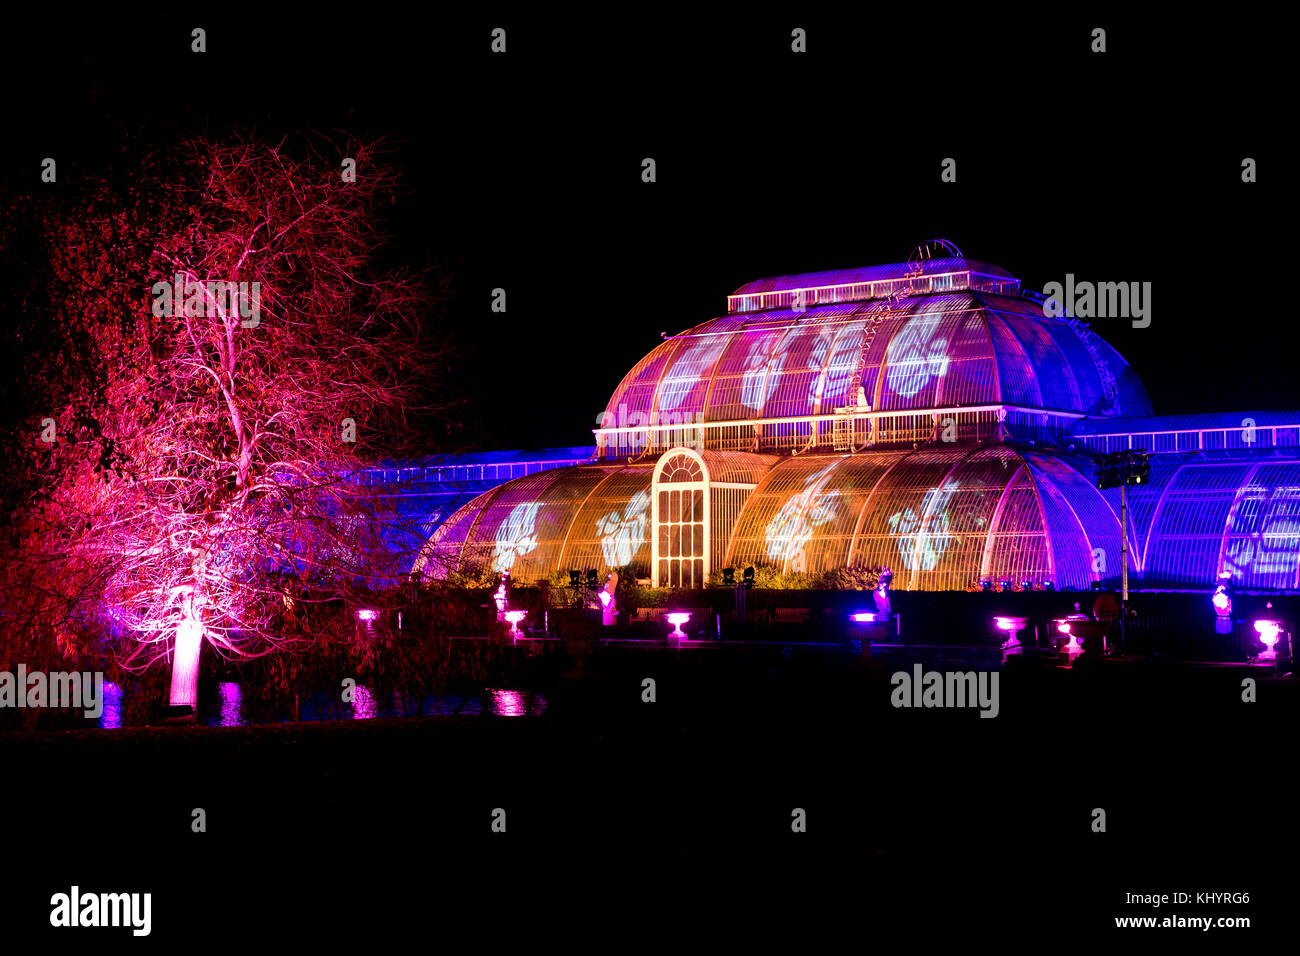 London, UK. 21st Nov, 2017. A magical illuminated trail through Kew’s magnificent after-dark landscape, lit up by over one million twinkling lights. Credit: Sebastian Remme/Alamy Live News Stock Photo